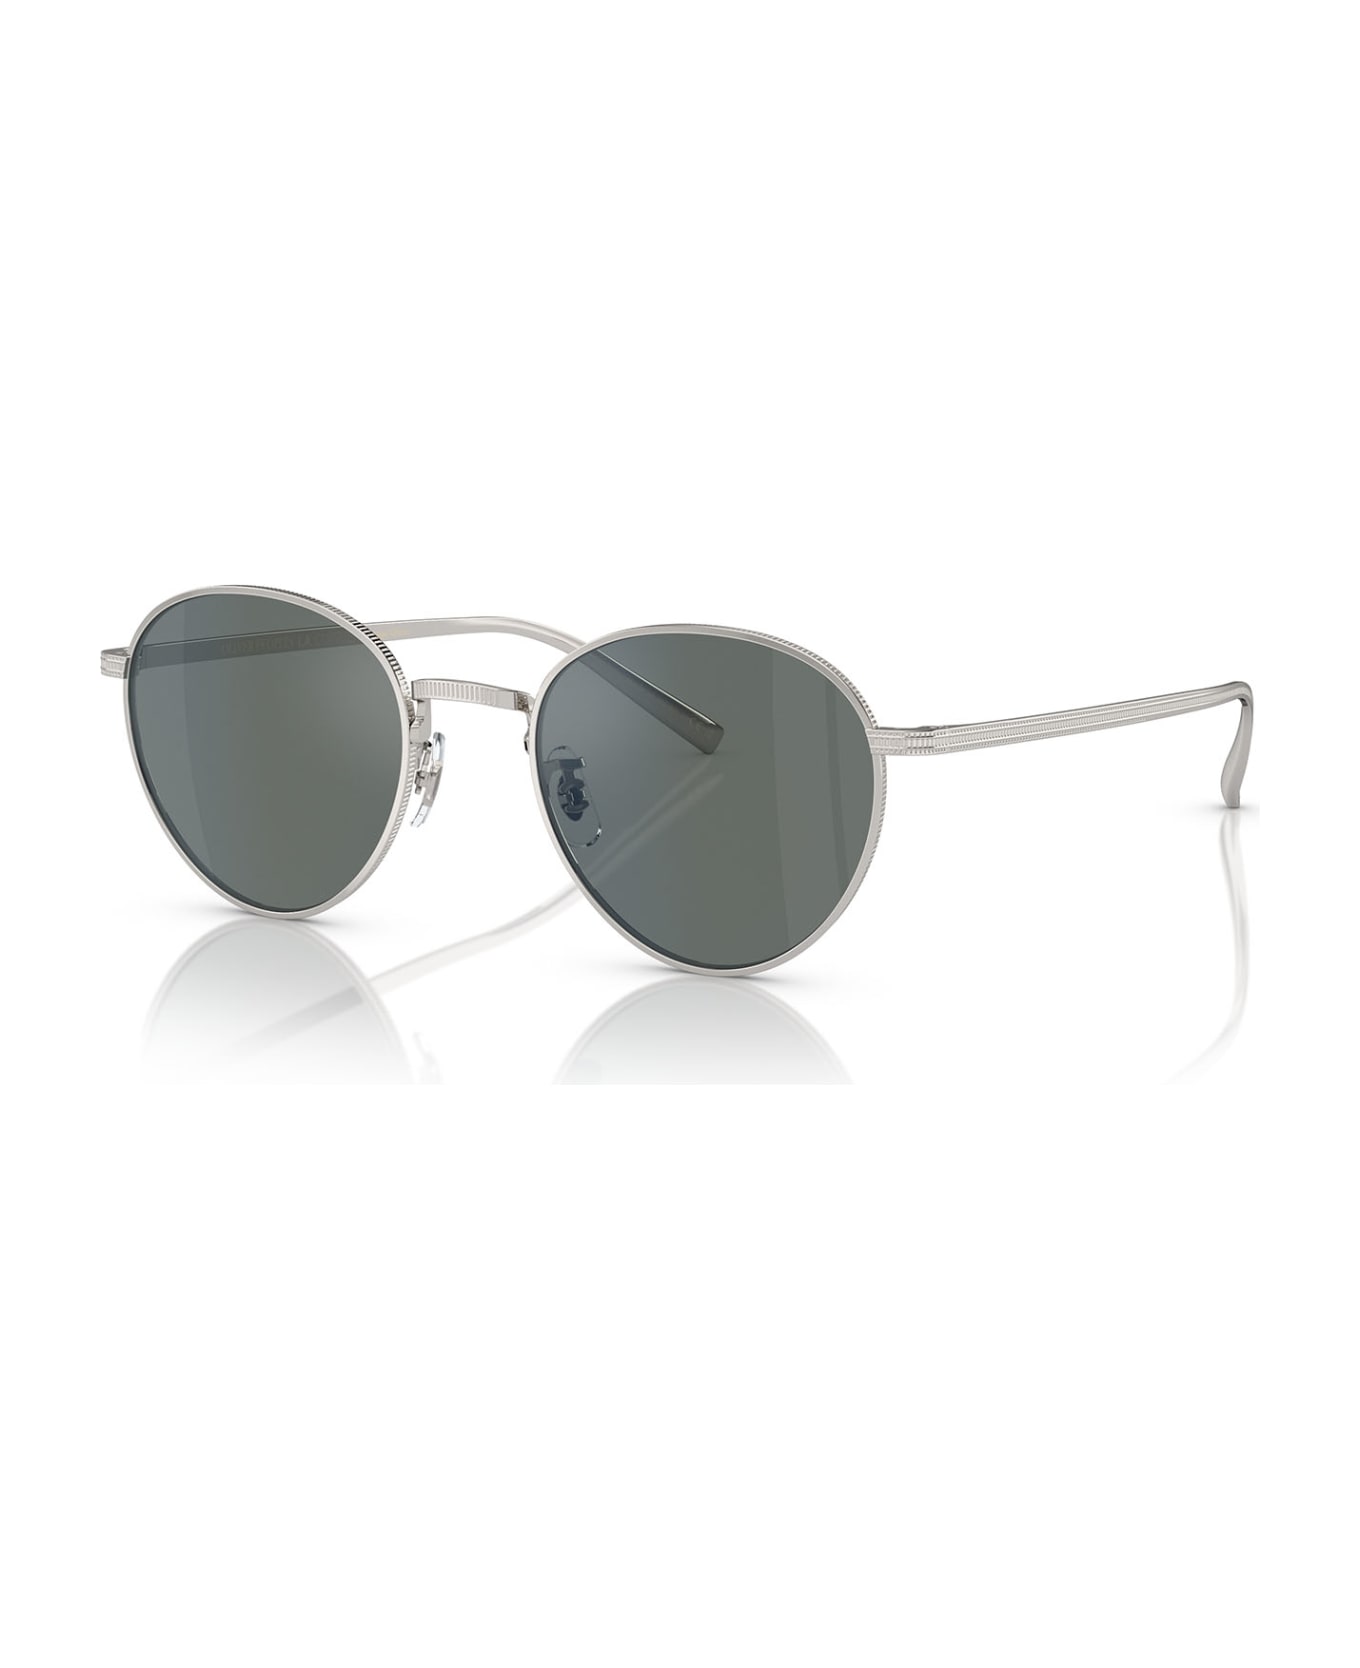 Oliver Peoples Ov1336st Silver Sunglasses - Silver サングラス